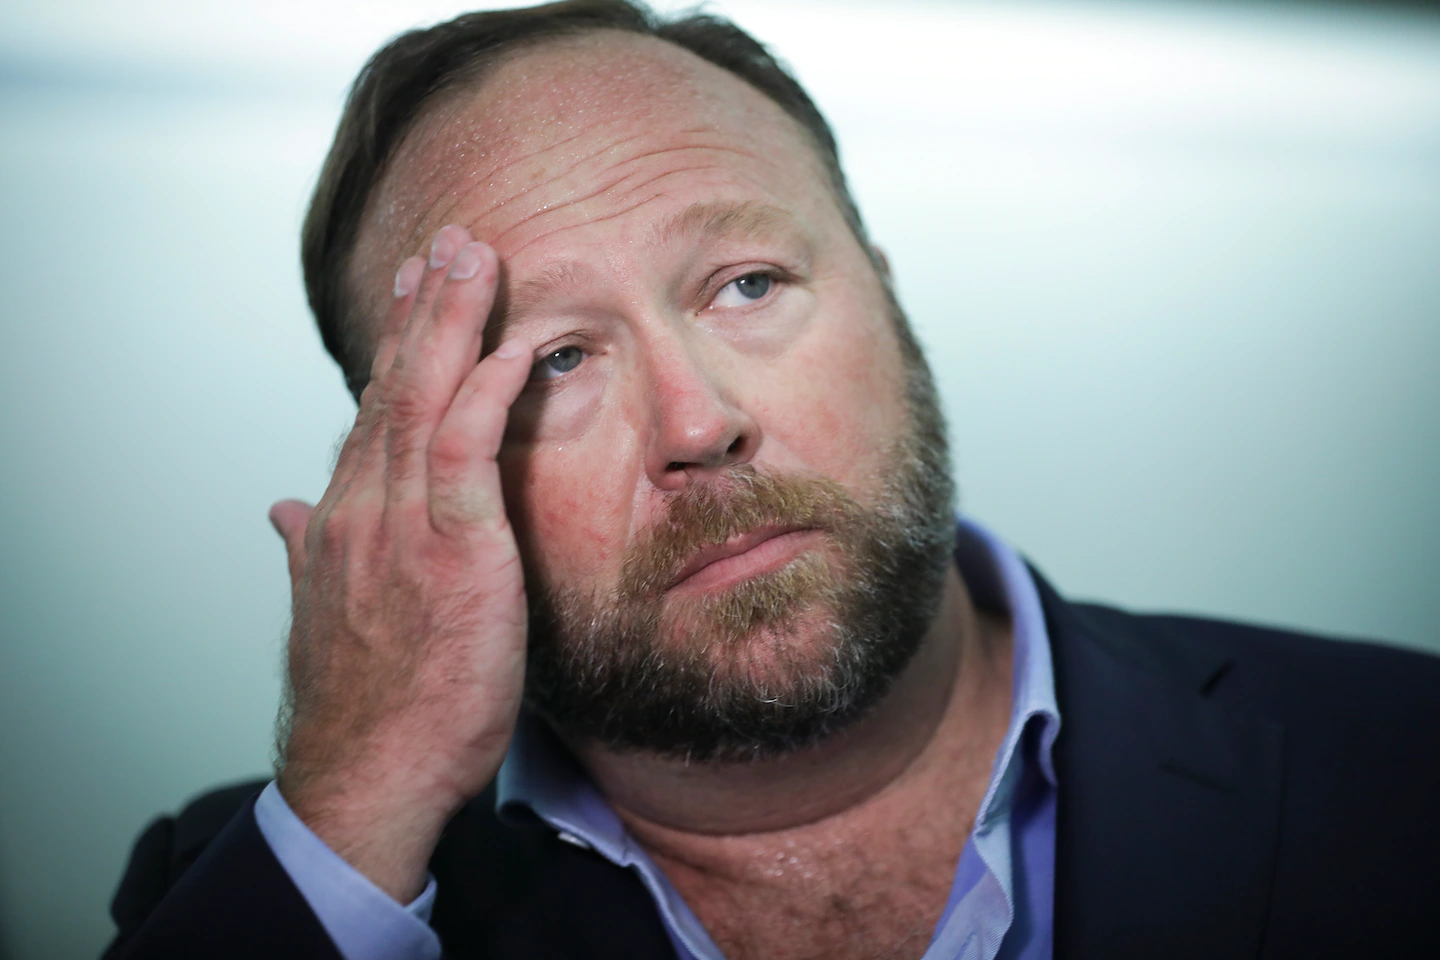  Alex Jones must pay damages to Sandy Hook families after calling shooting a ‘giant hoax,’ judge rules